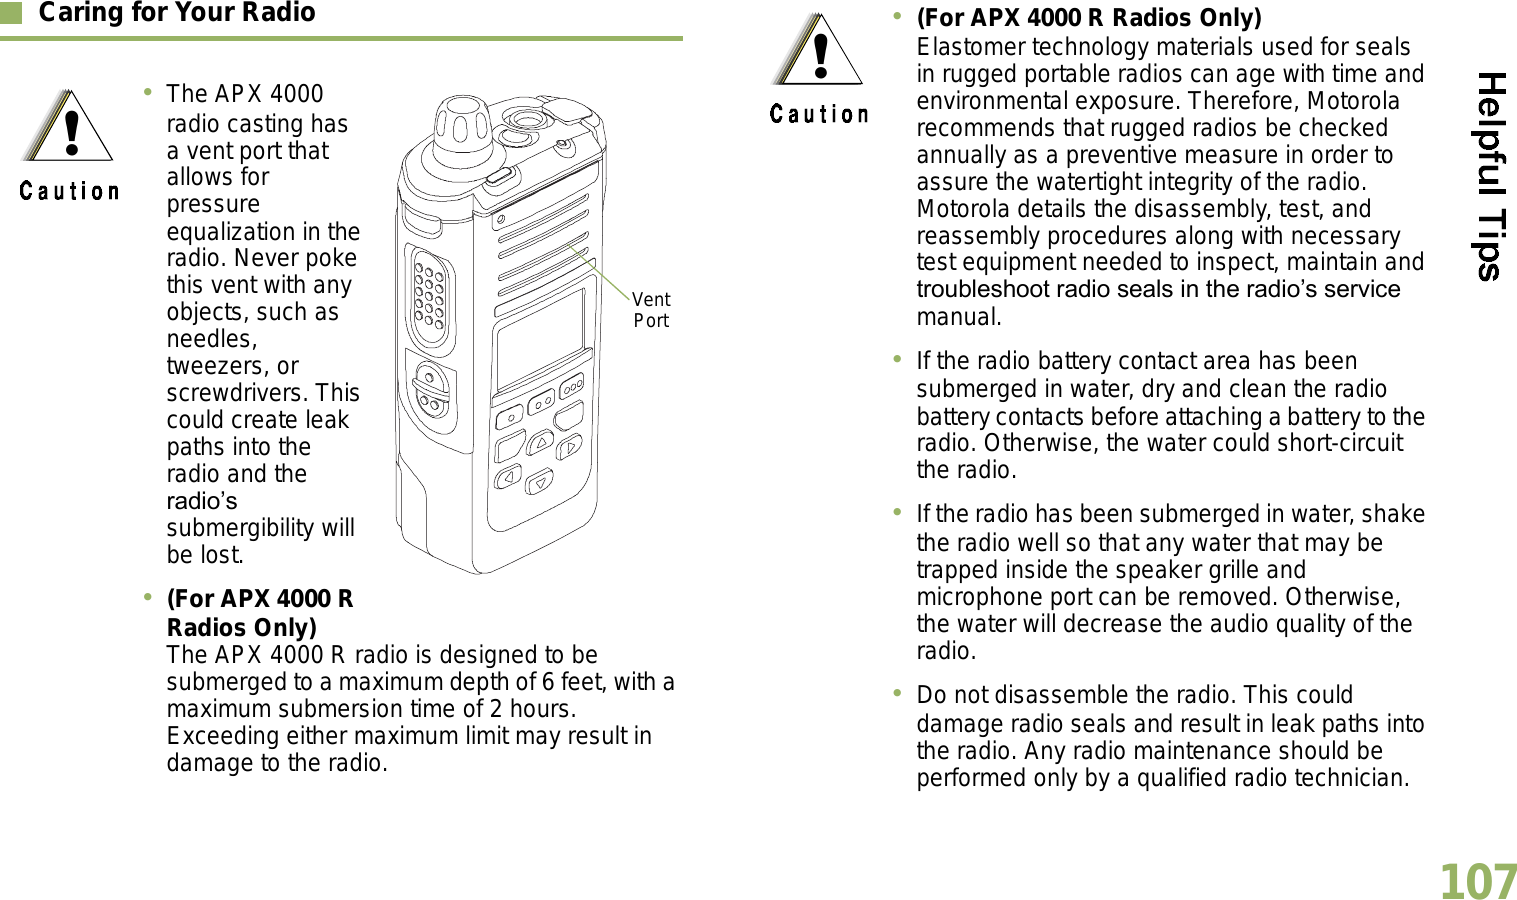 English107Caring for Your RadioThe APX 4000 radio casting has a vent port that allows for pressure equalization in the radio. Never poke this vent with any objects, such as needles, tweezers, or screwdrivers. This could create leak paths into the radio and the radios submergibility will be lost.  (For APX 4000 R Radios Only) The APX 4000 R radio is designed to be submerged to a maximum depth of 6 feet, with a maximum submersion time of 2 hours. Exceeding either maximum limit may result in damage to the radio.Vent Port(For APX 4000 R Radios Only) Elastomer technology materials used for seals in rugged portable radios can age with time and environmental exposure. Therefore, Motorola recommends that rugged radios be checked annually as a preventive measure in order to assure the watertight integrity of the radio. Motorola details the disassembly, test, and reassembly procedures along with necessary test equipment needed to inspect, maintain and troubleshoot radio seals in the radios service manual.If the radio battery contact area has been submerged in water, dry and clean the radio battery contacts before attaching a battery to the radio. Otherwise, the water could short-circuit the radio.If the radio has been submerged in water, shake the radio well so that any water that may be trapped inside the speaker grille and microphone port can be removed. Otherwise, the water will decrease the audio quality of the radio.Do not disassemble the radio. This could damage radio seals and result in leak paths into the radio. Any radio maintenance should be performed only by a qualified radio technician.